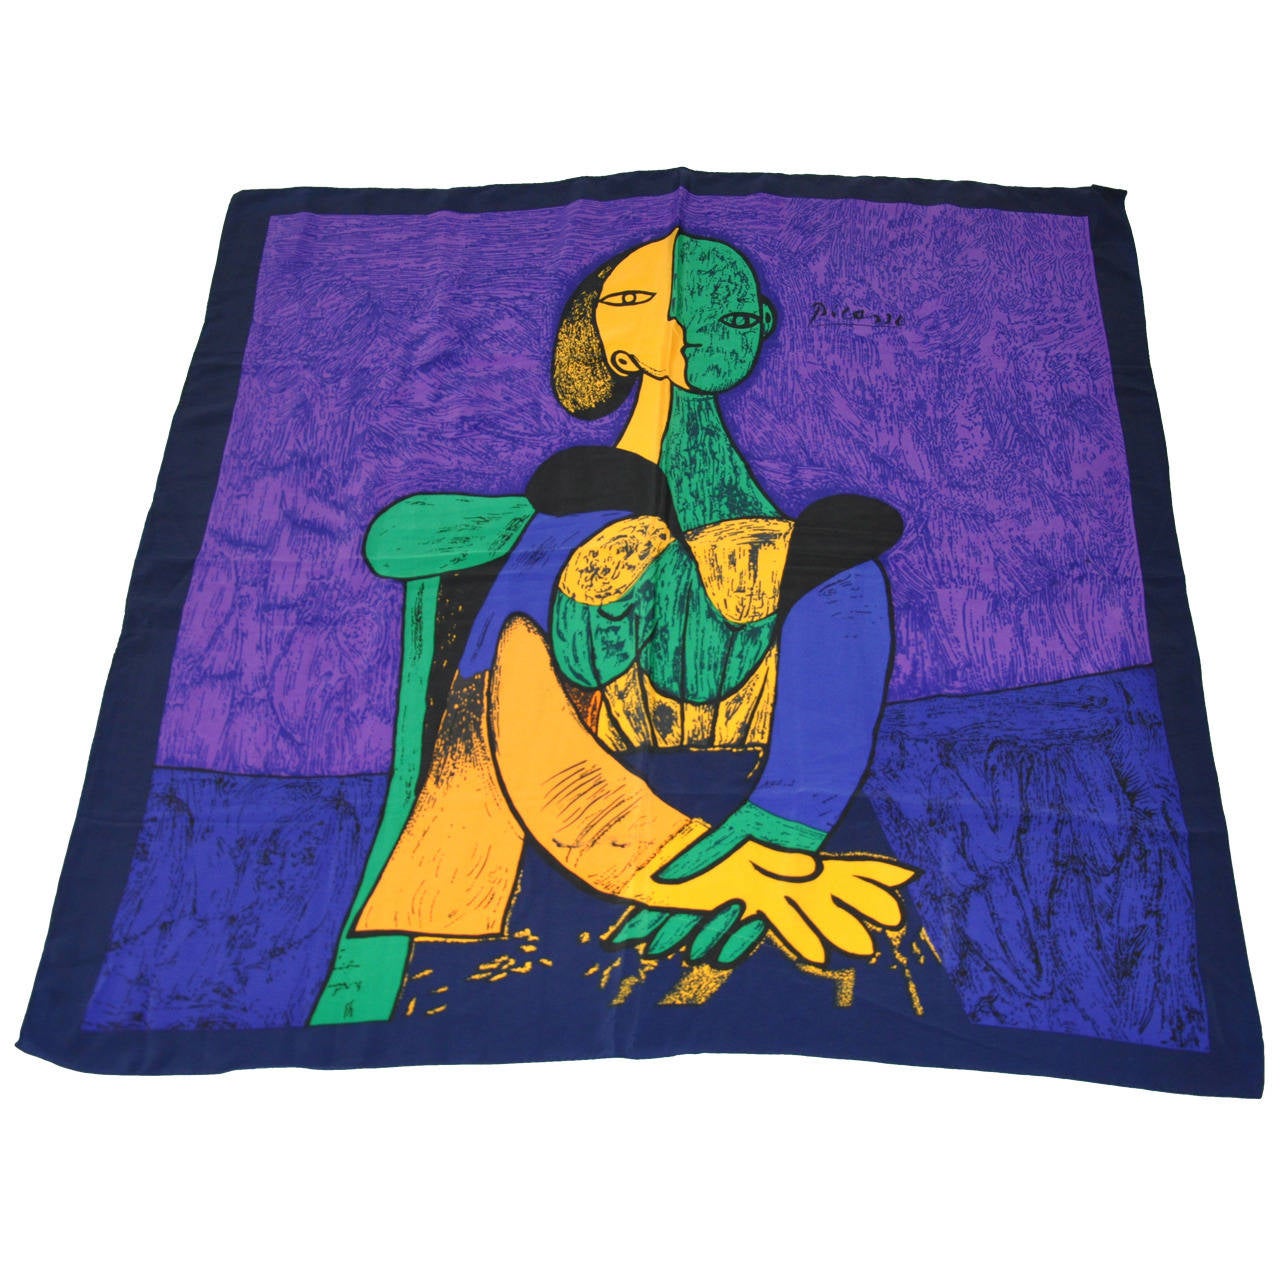 Picasso "Portait" Silk Scarf For Sale at 1stDibs | picasso scarf silk, picasso  silk scarf, picasso scarves